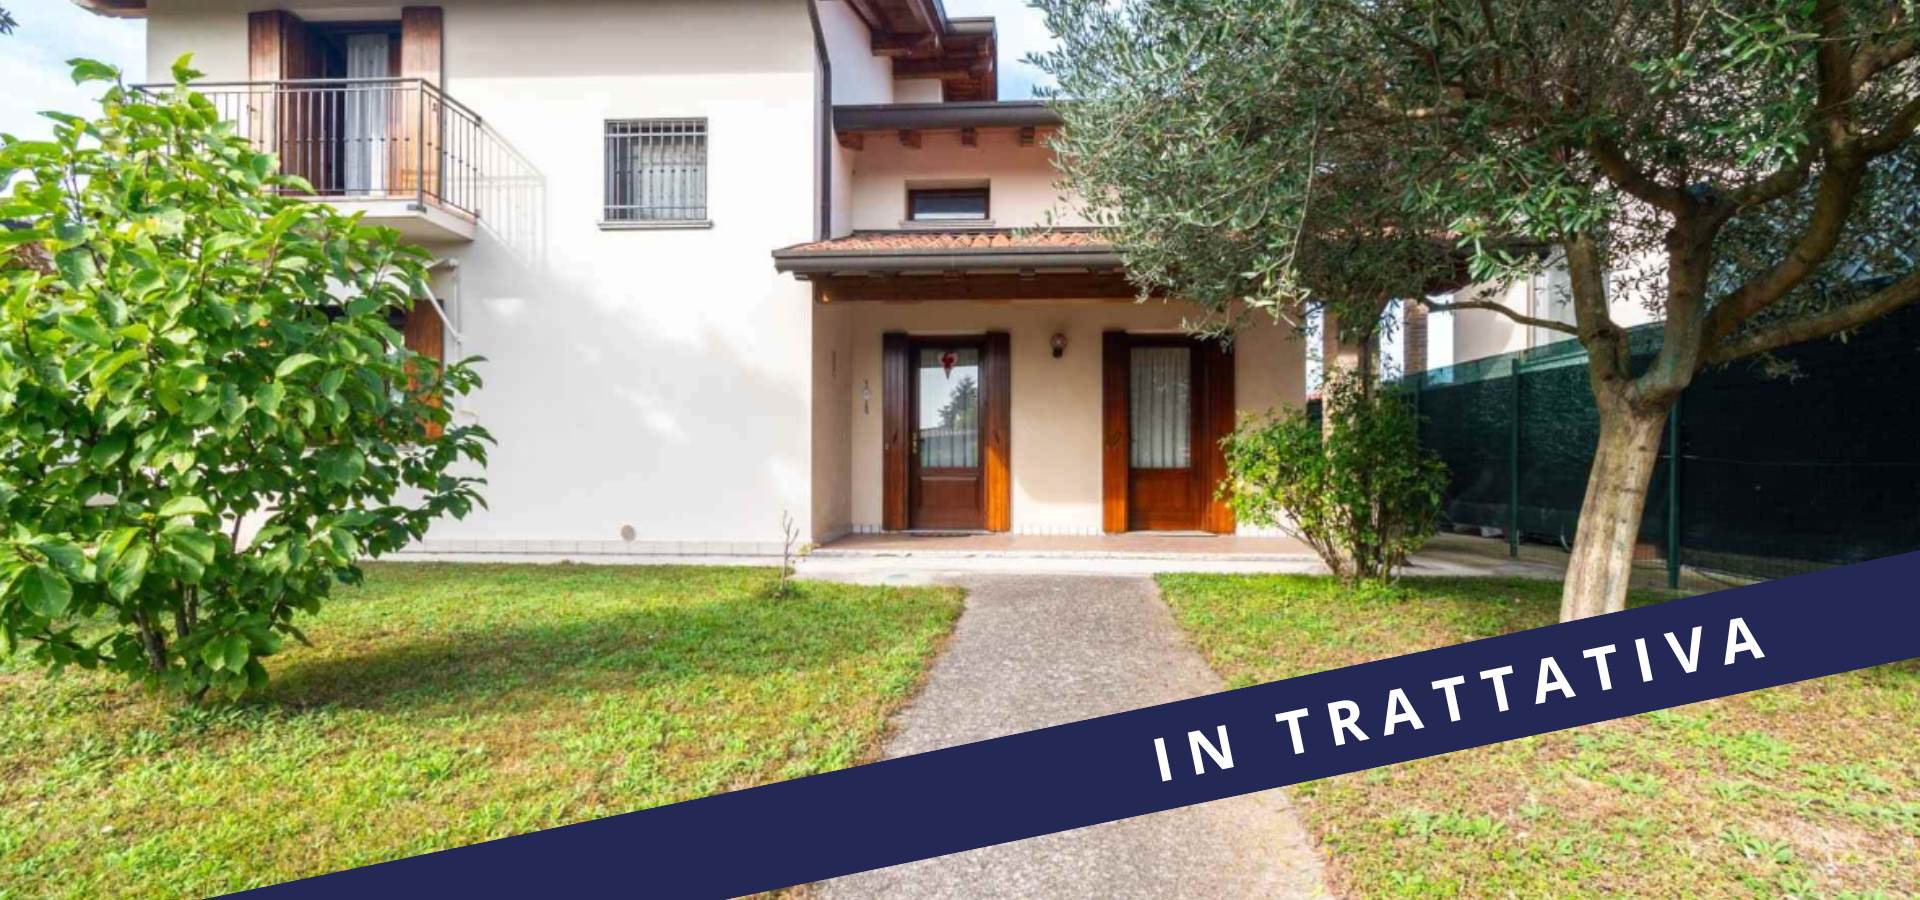 FOSSALTA DI PORTOGRUARO, Villa for sale of 150 Sq. mt., Excellent Condition, Heating To floor, Energetic class: D, placed at Ground, composed by: 6 Rooms, Separate kitchen, , 3 Bedrooms, 2 Bathrooms, 